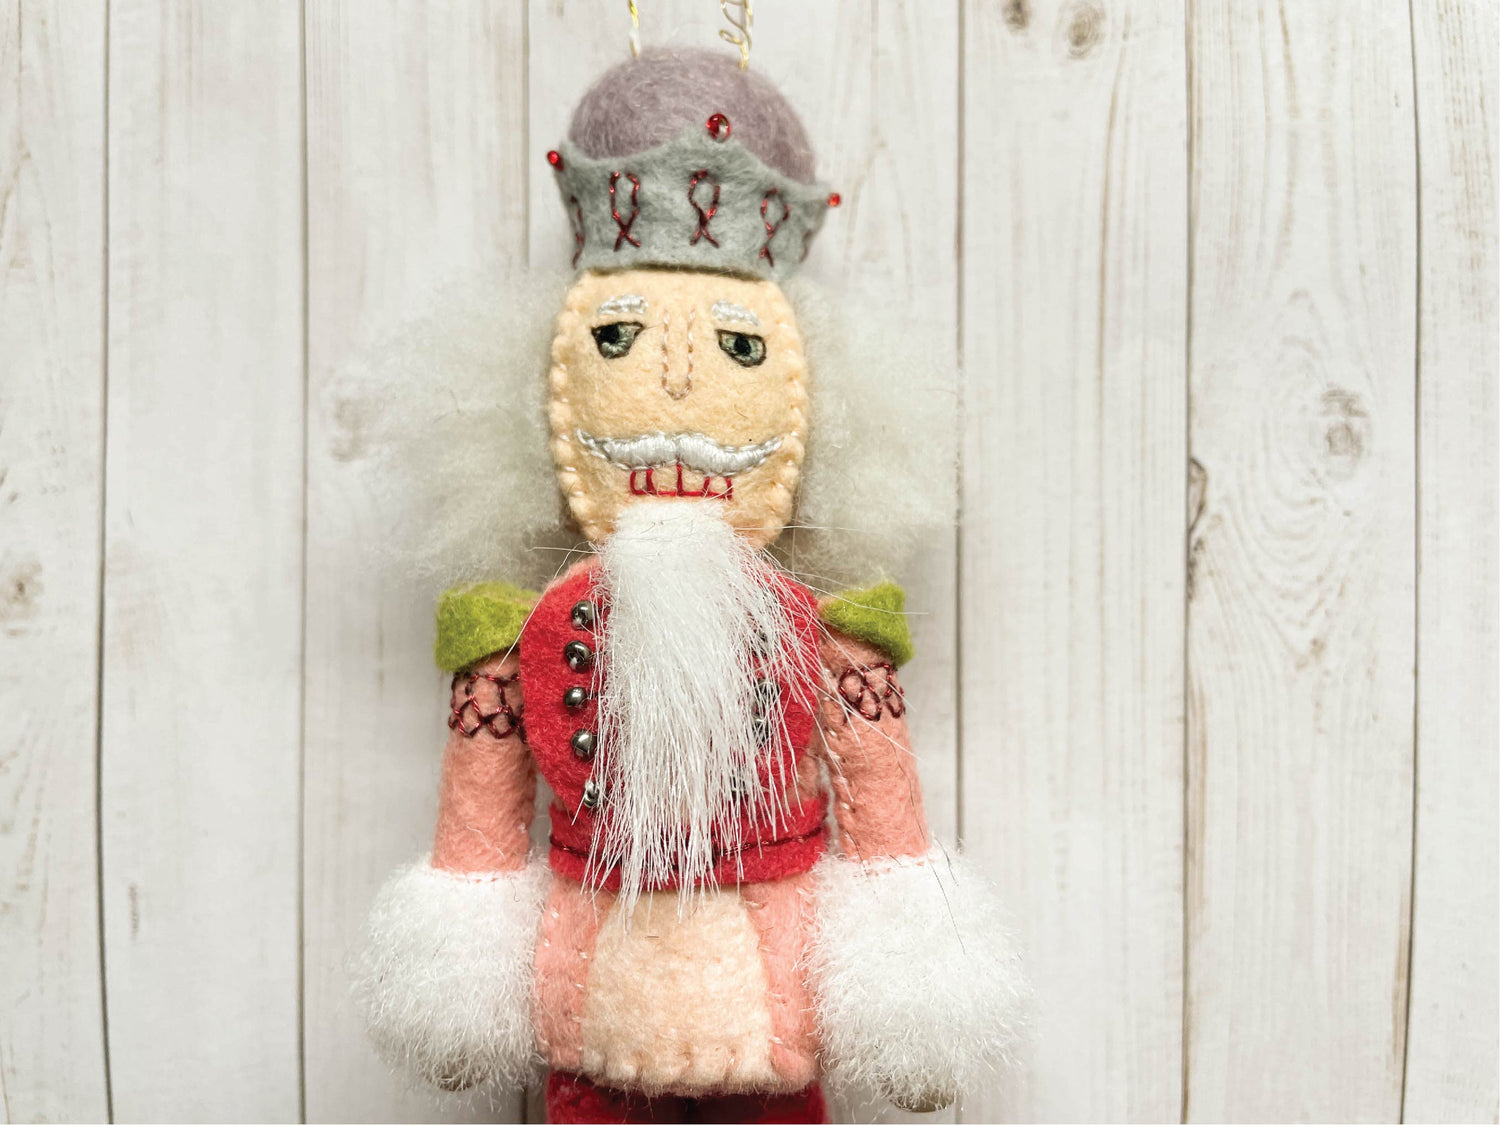 Nathan the Nutcracker Embroidery and Hand Sewing Pattern